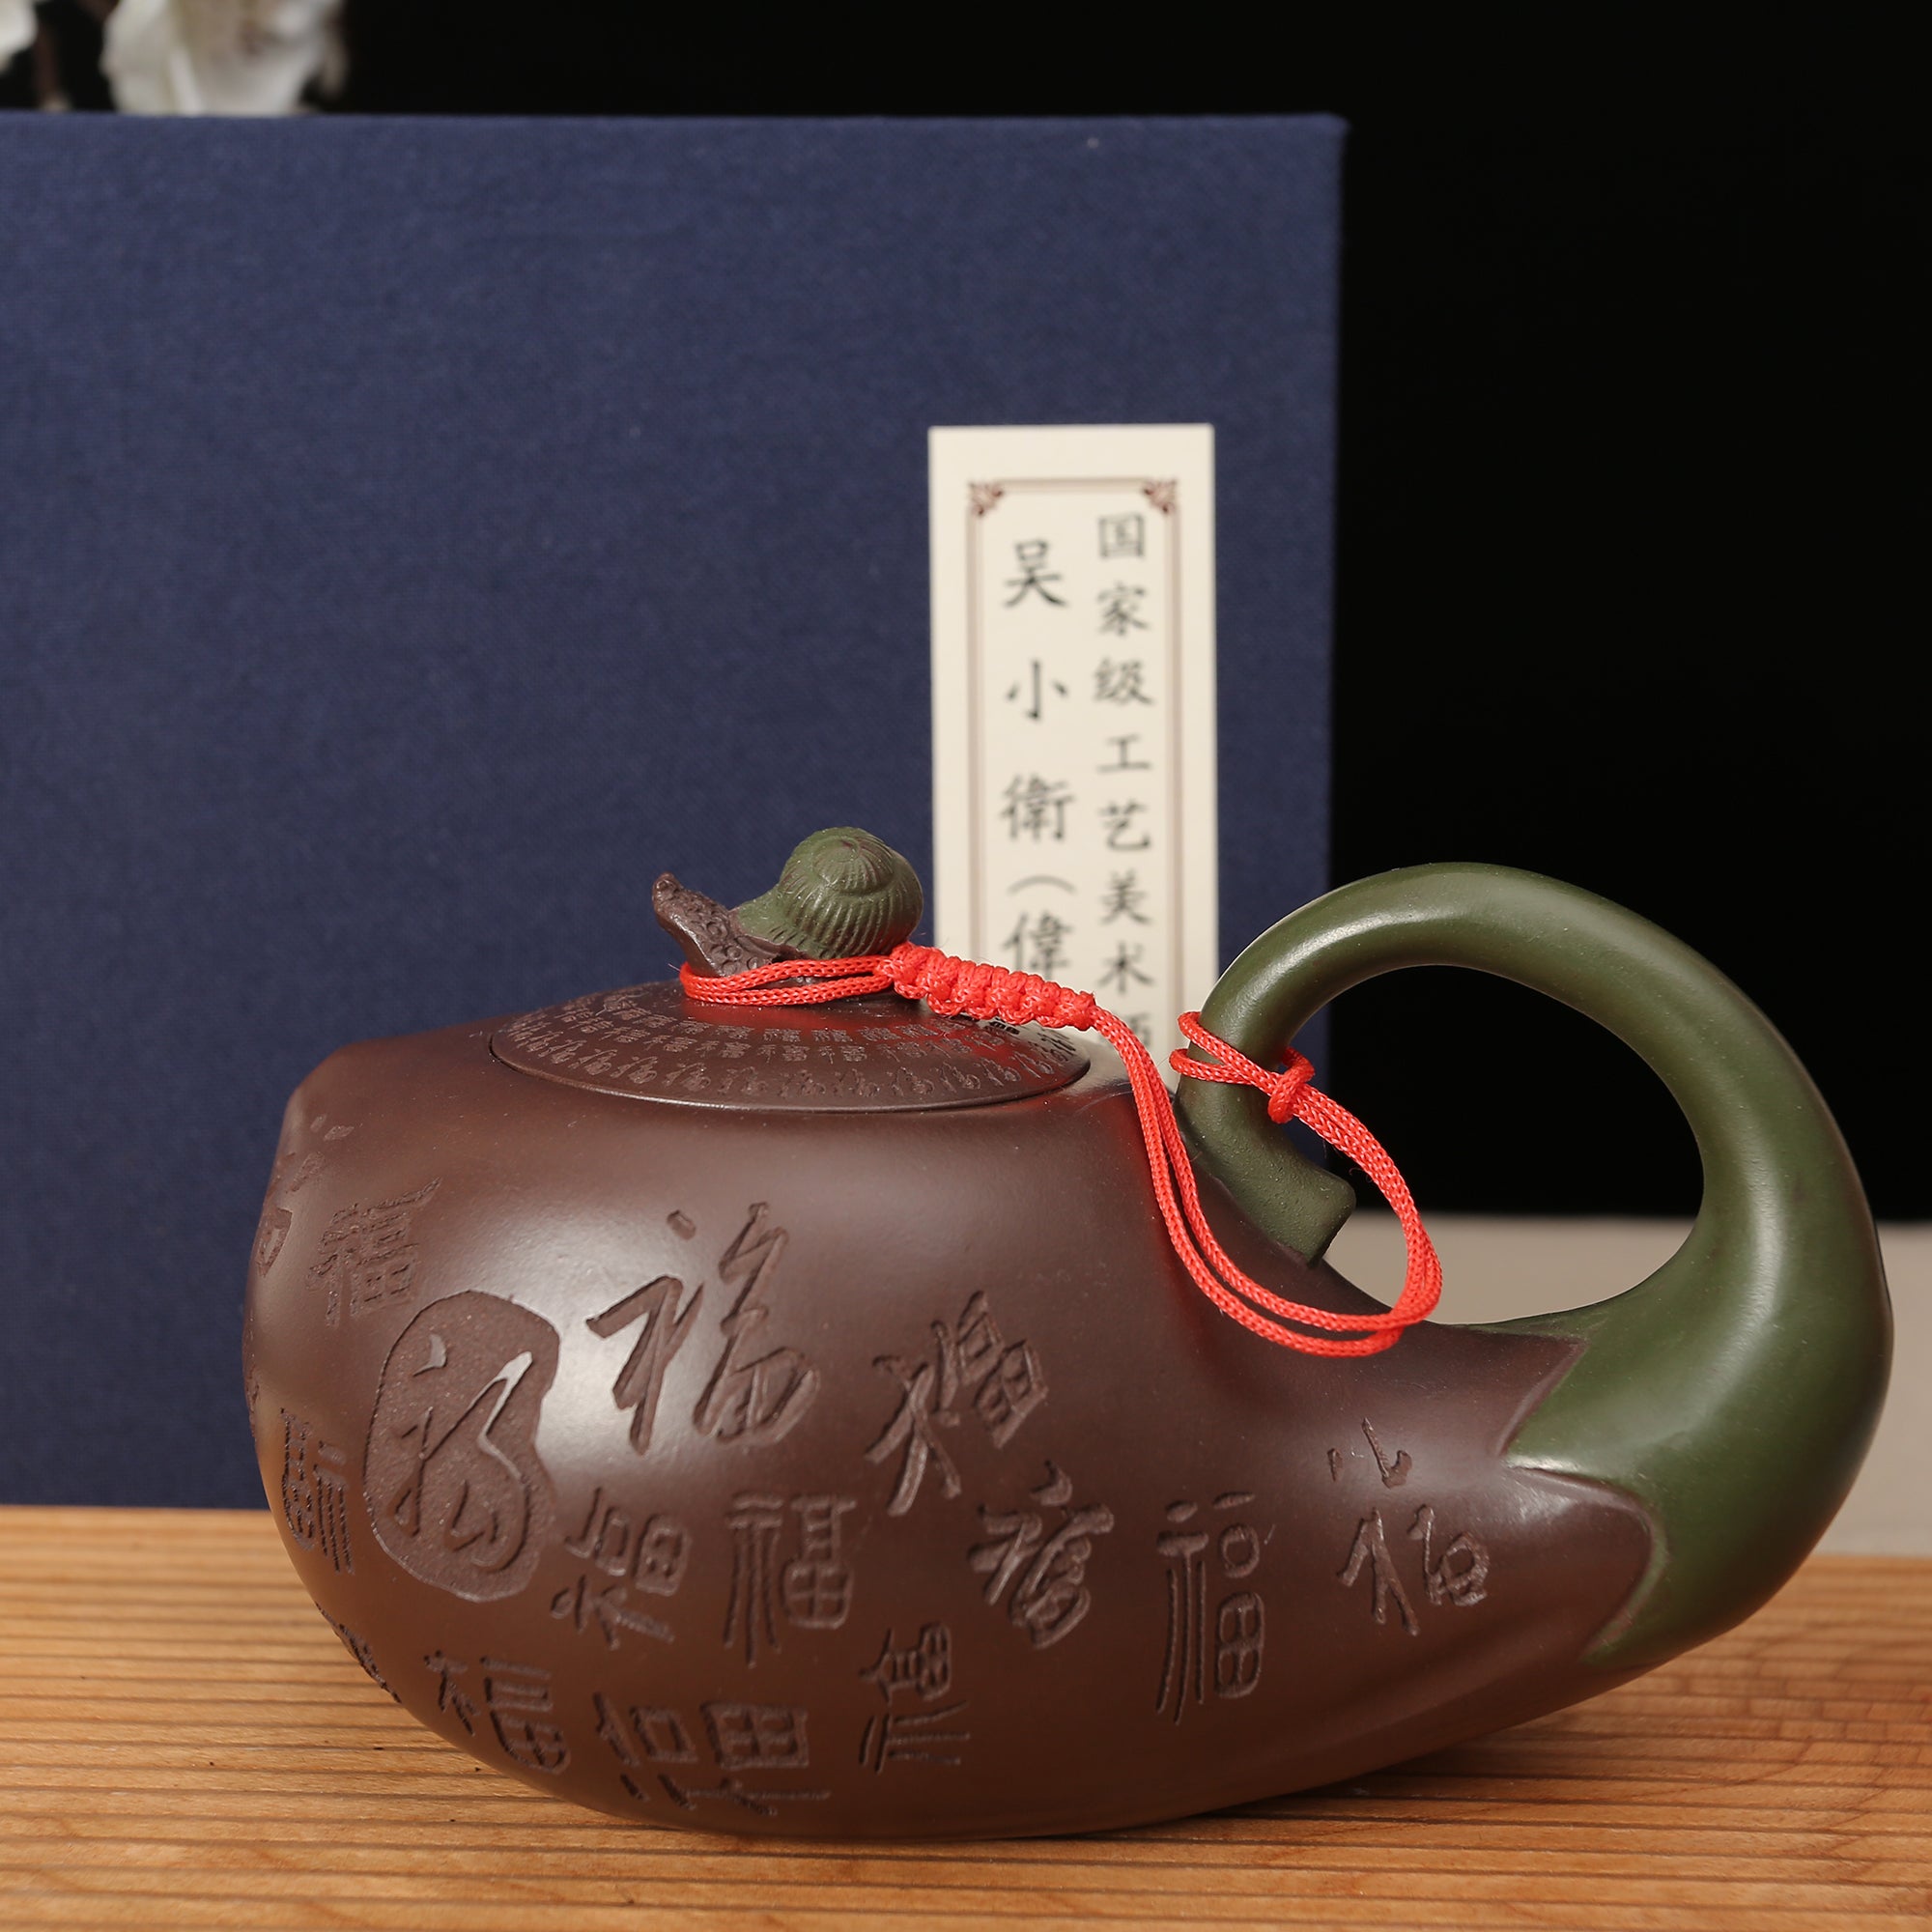 Pueple clay Teapot-Hundred Blessings Eggplant